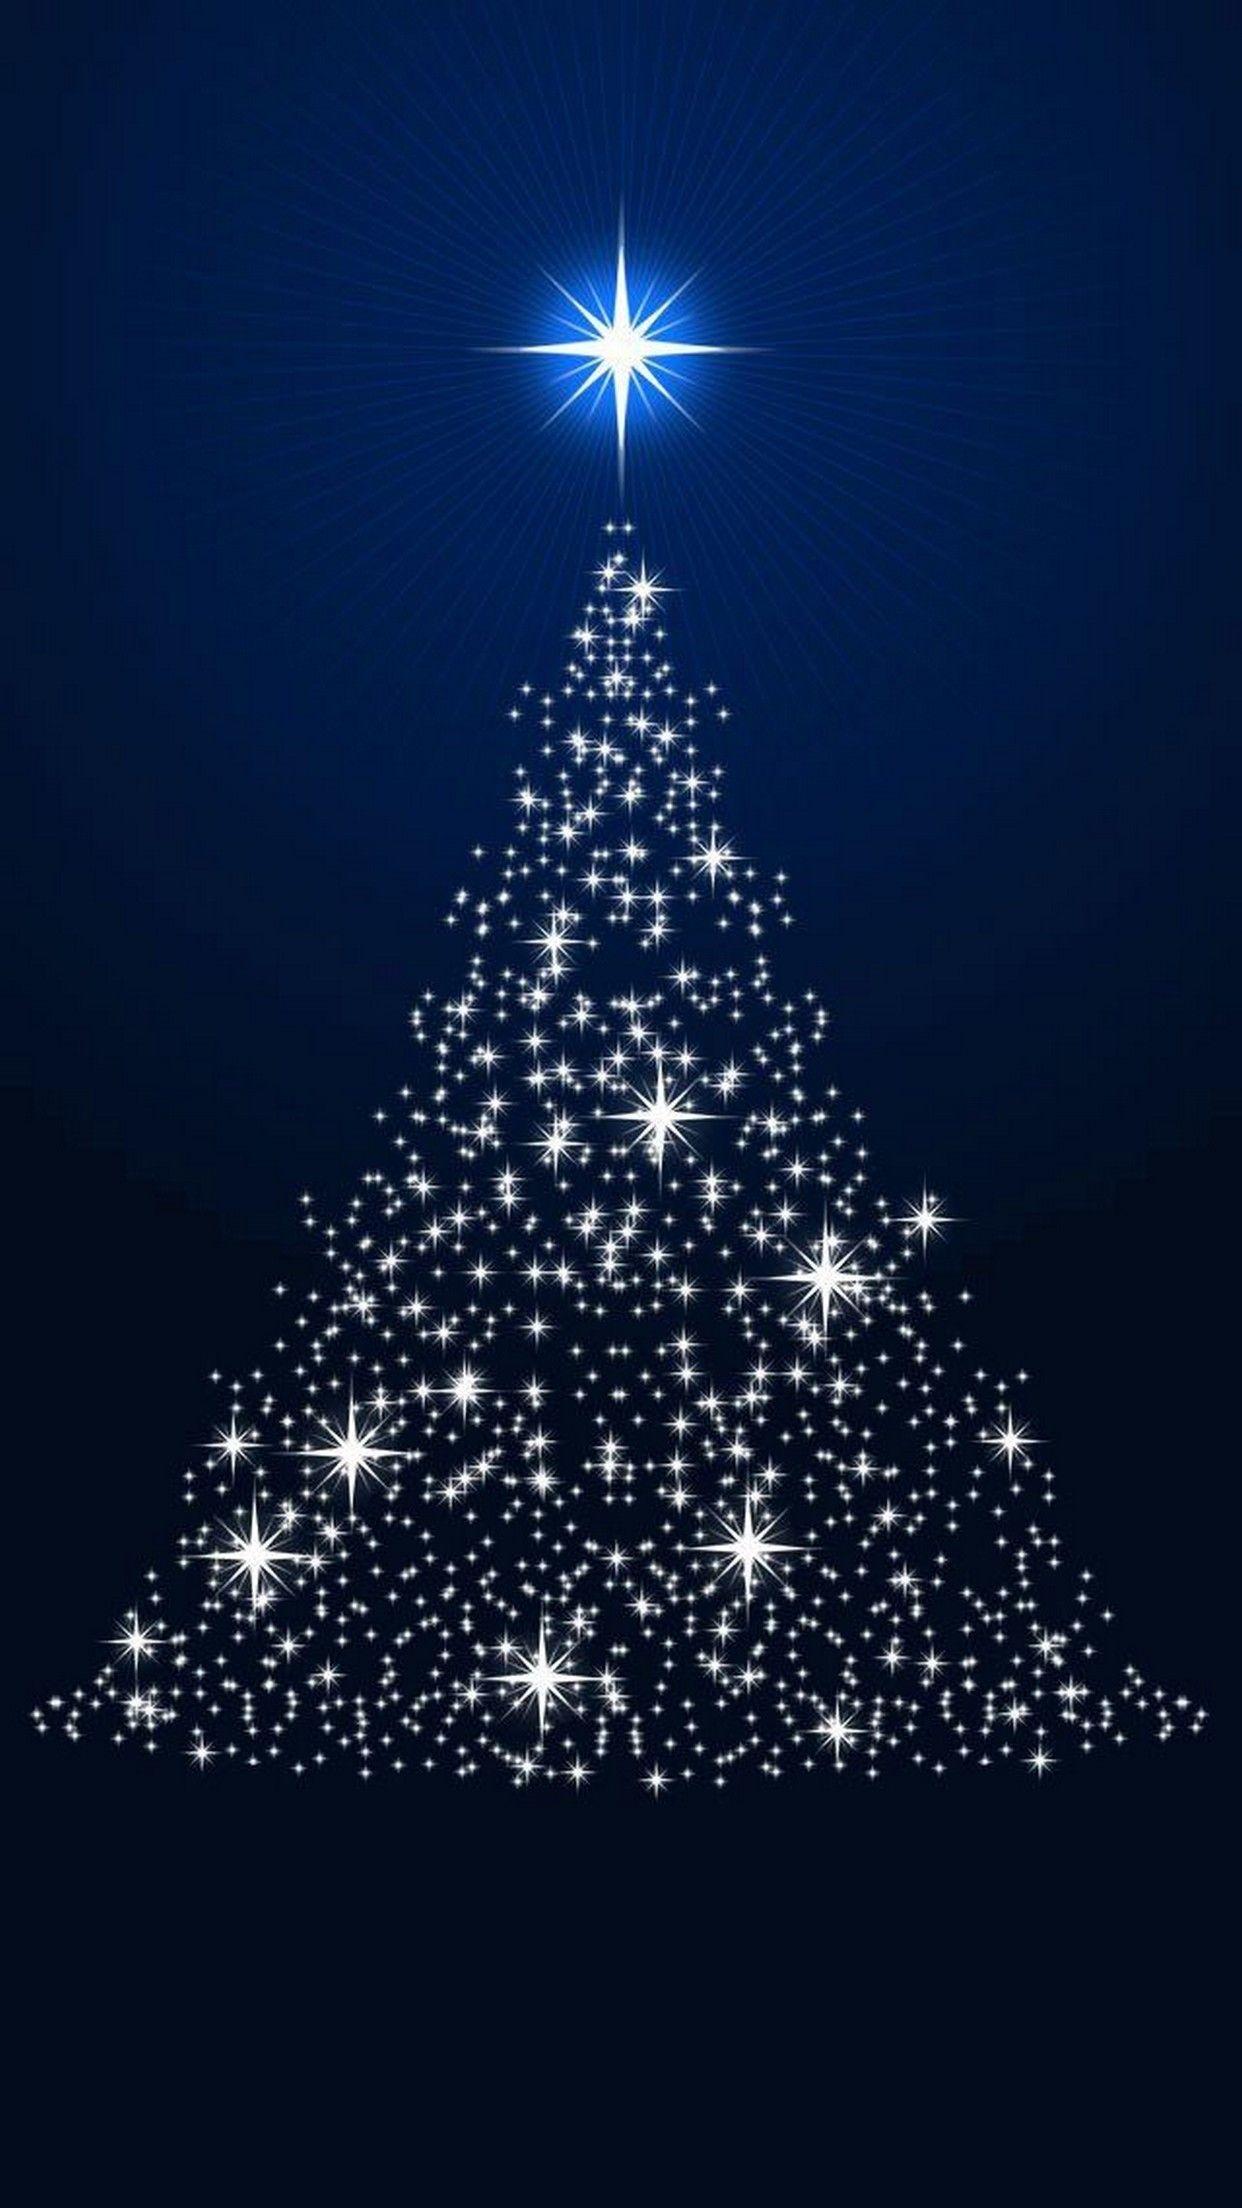 Free Christmas Wallpaper For iPhone X. English as a Second Language at Rice University